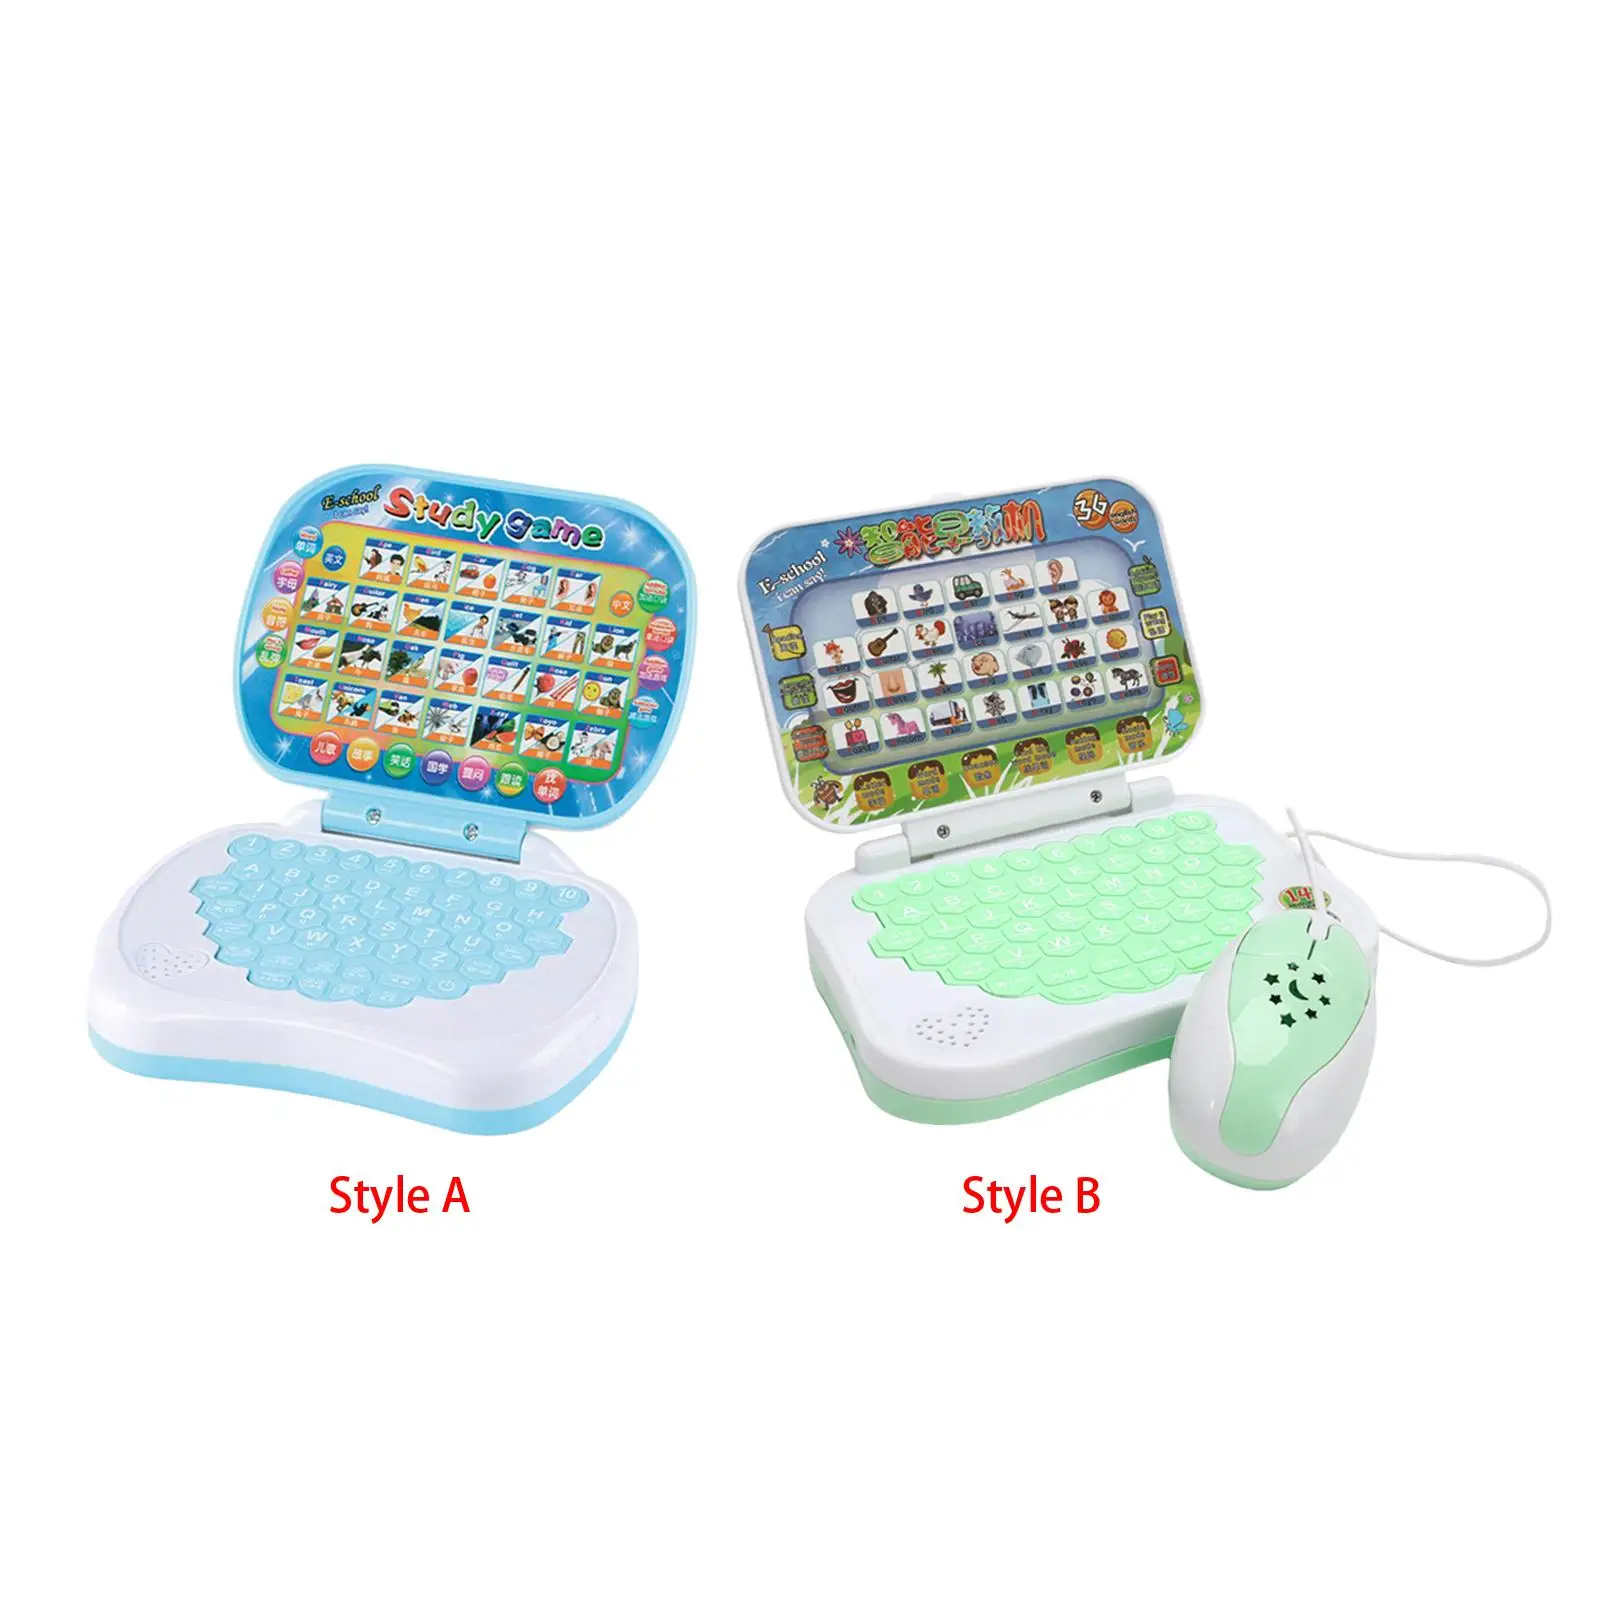 Handheld Language Learning Machine Child Interactive Learning Pad Tablet for Children Toddler Girls Boys Bithday Gifts